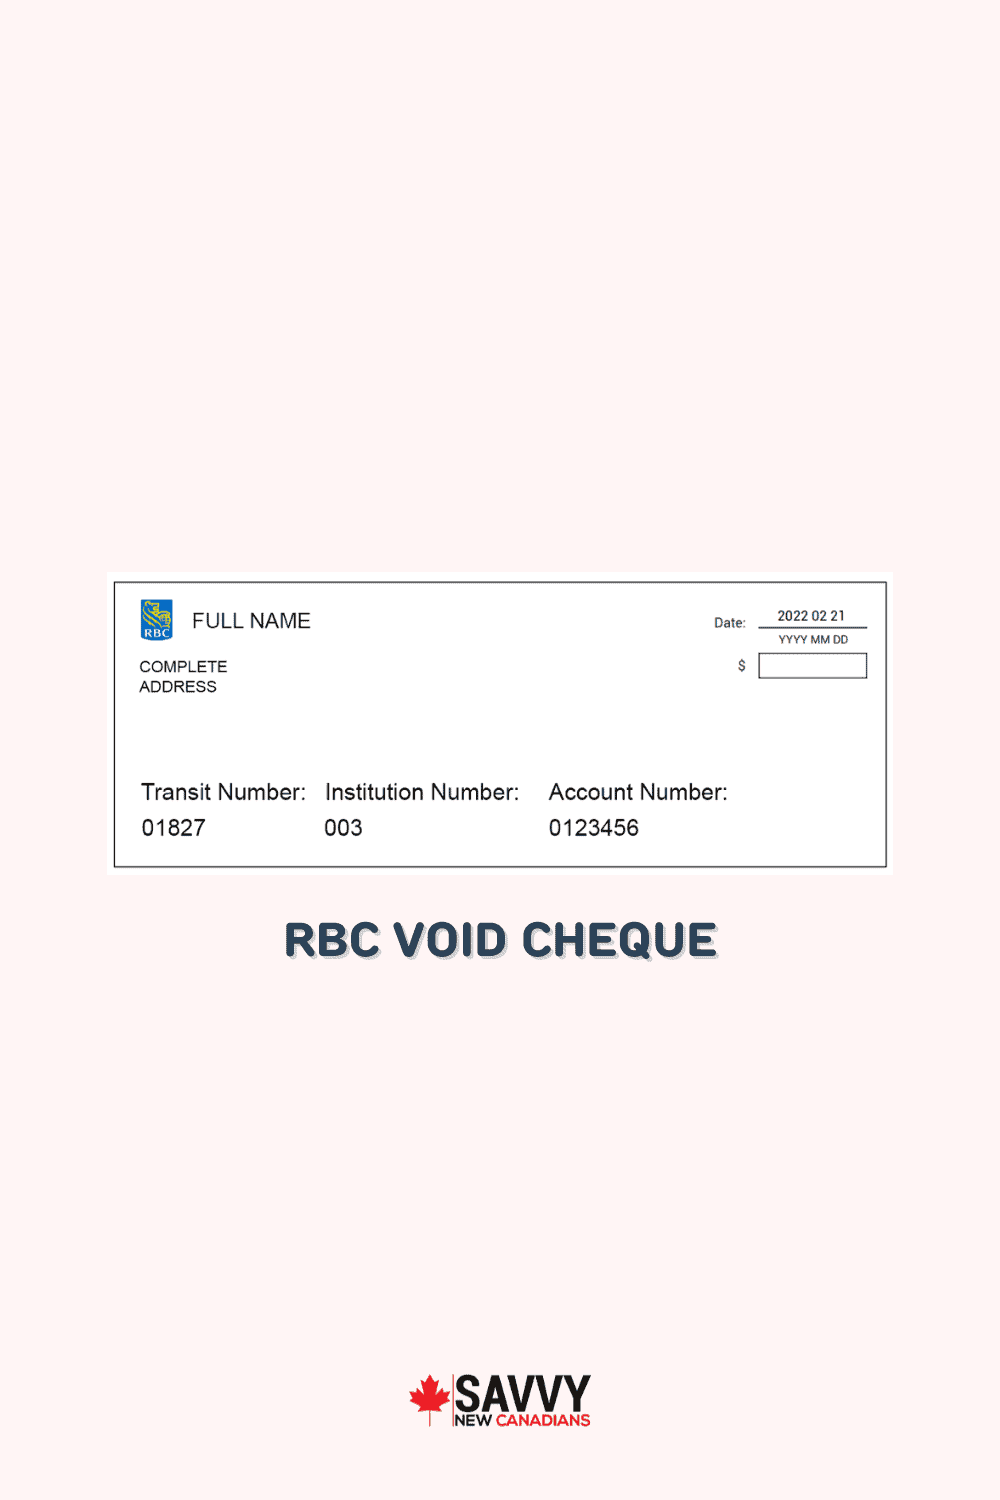 RBC Void Cheque: How To Read and Get an RBC Sample Cheque in 2022